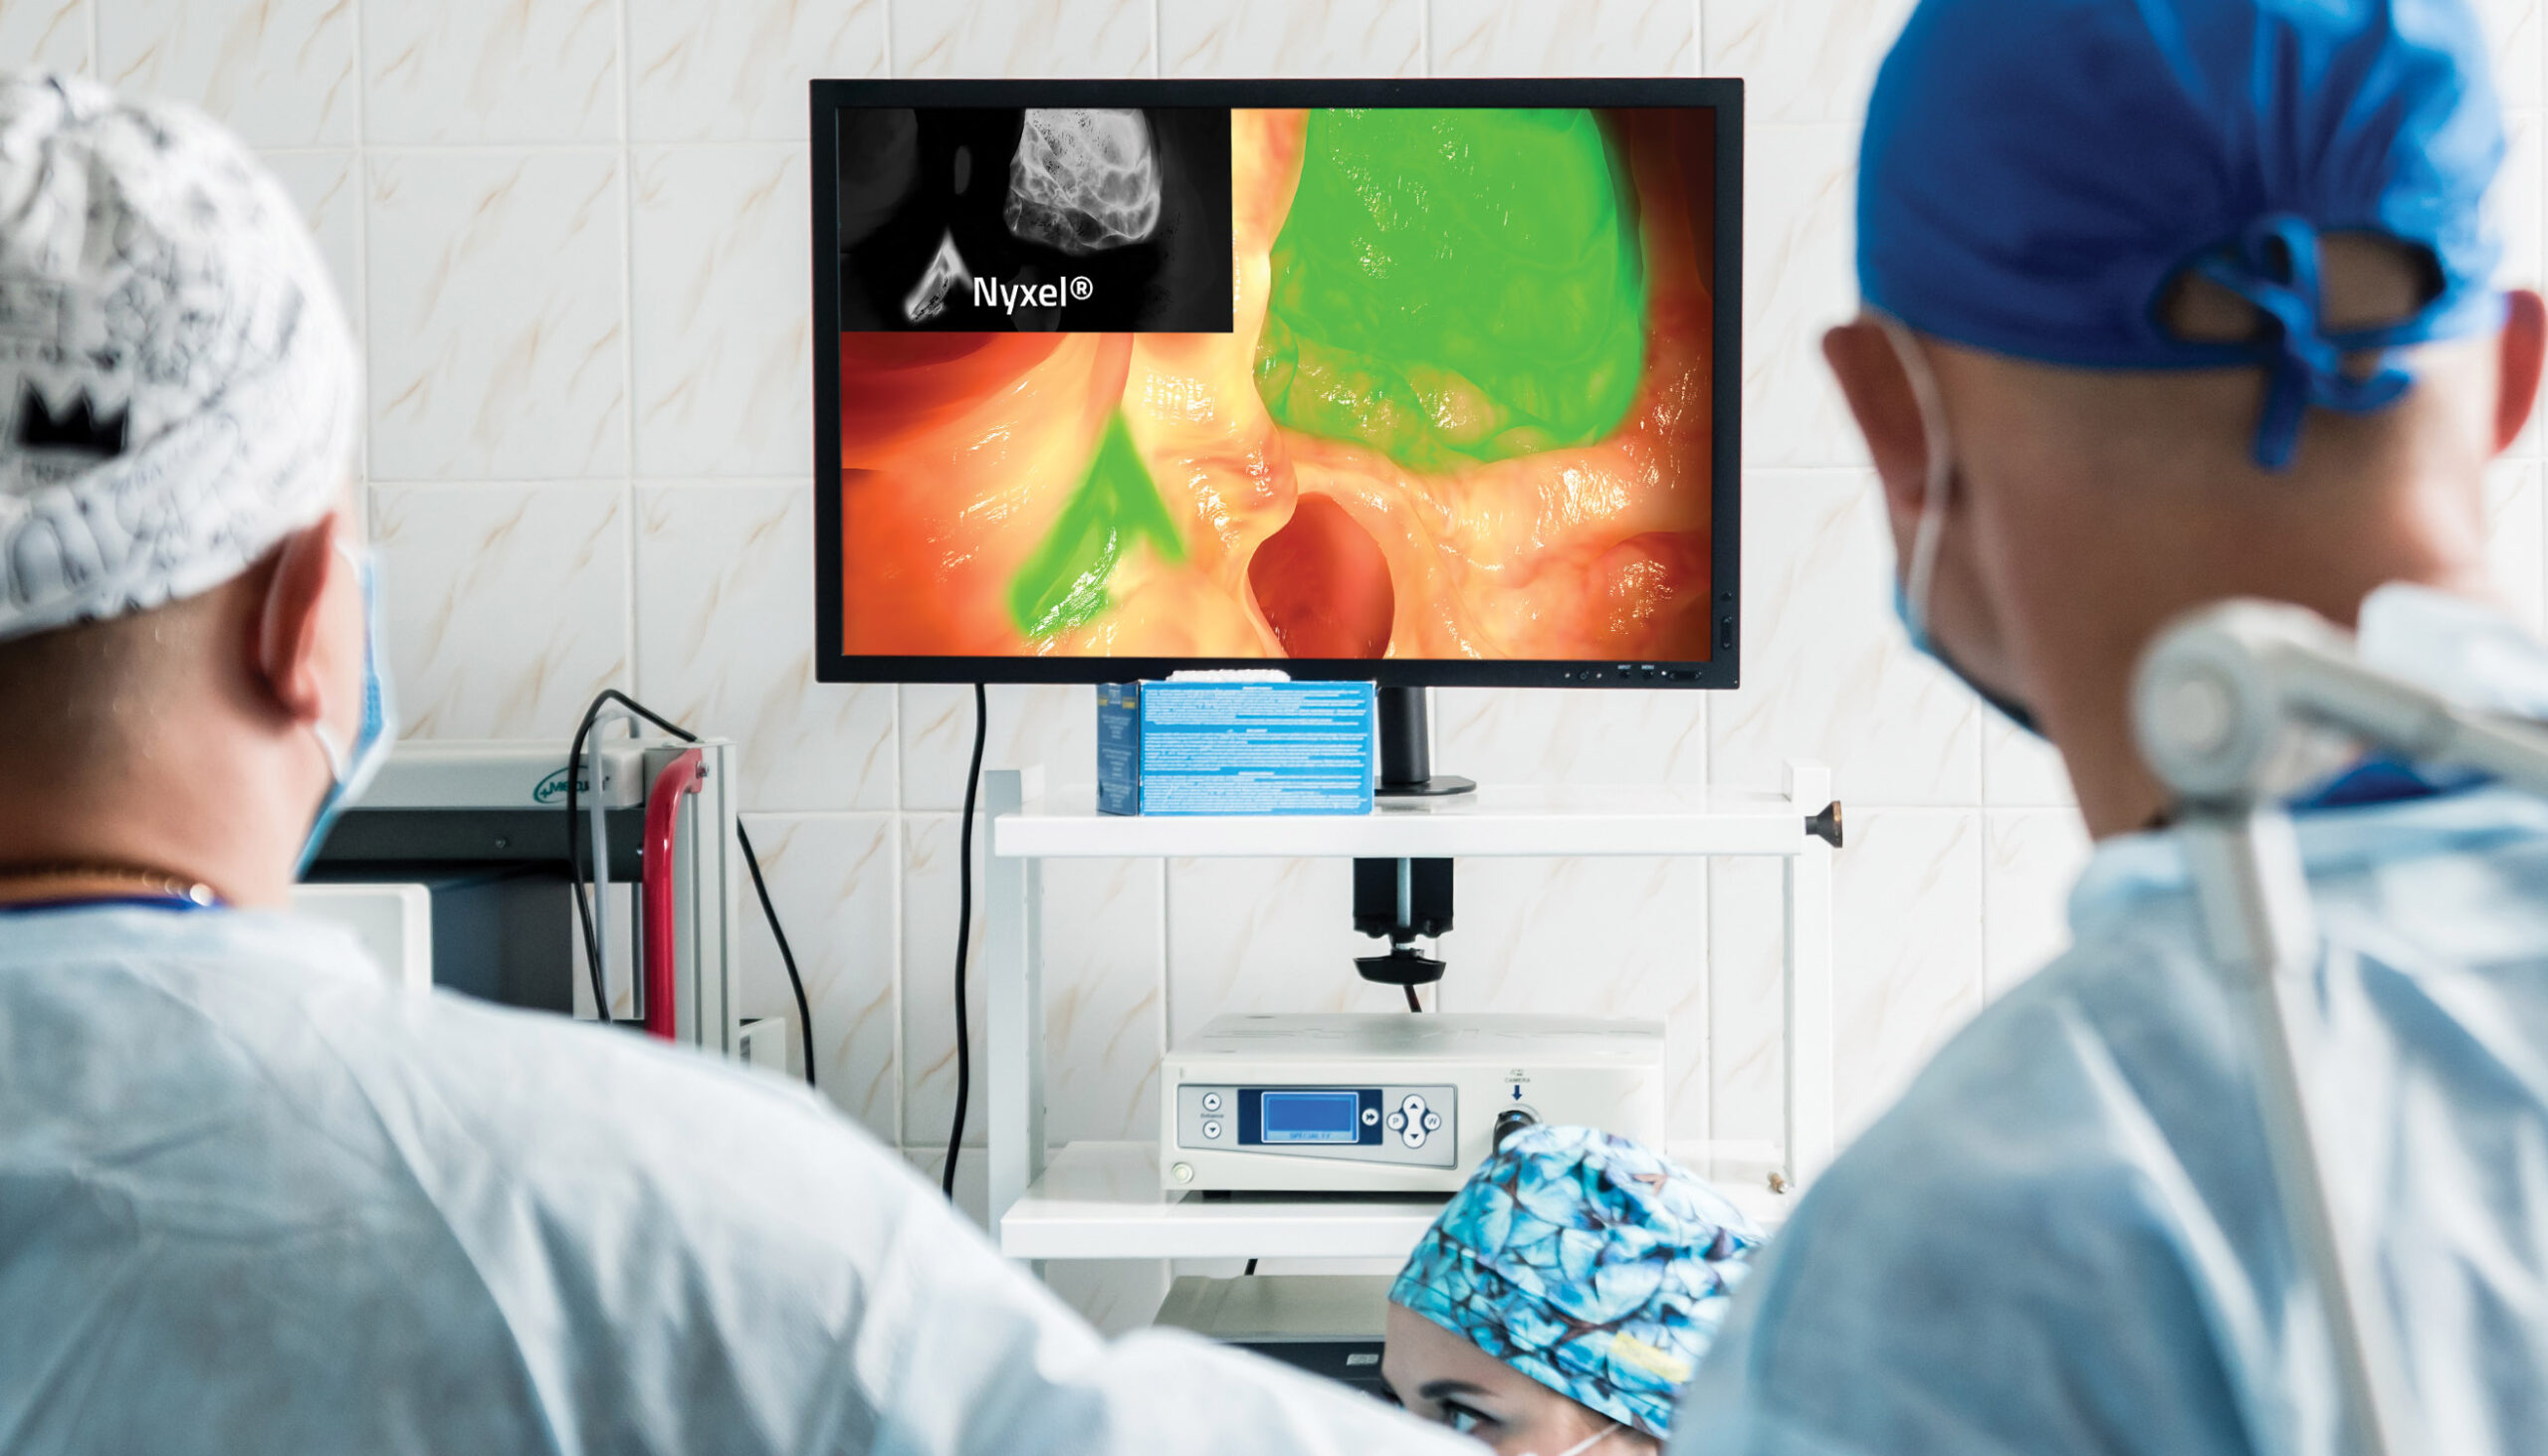 Industry’s First 8-Megapixel Medical-Grade Image Sensor with Nyxel® Technology for Single-Use and Reusable Endoscopes